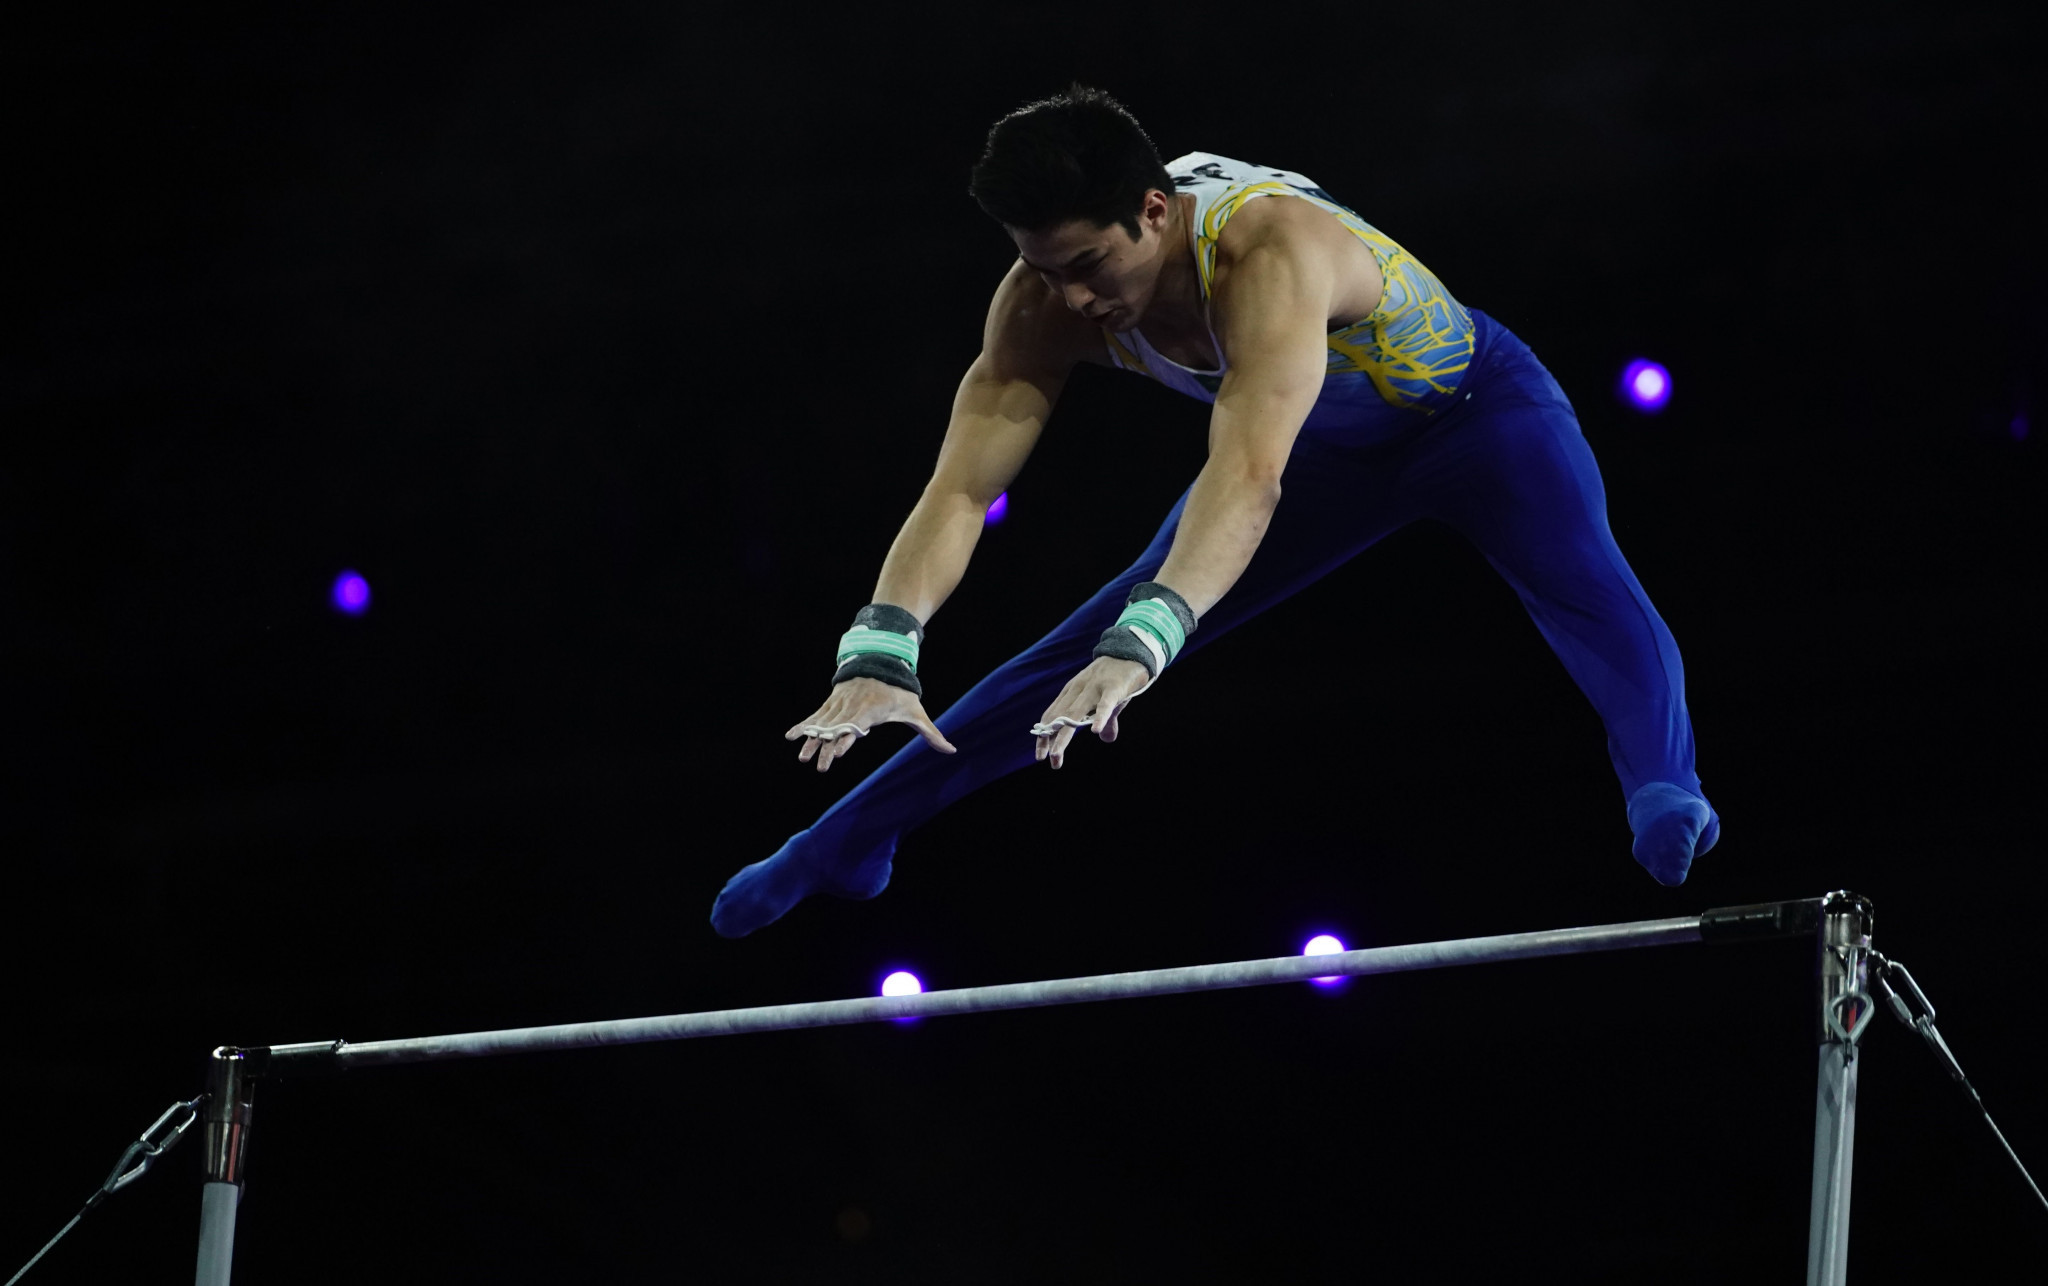 Arthur Mariano won the horizontal bar event at this year's Artistic Gymnastics World Championships ©Getty Images